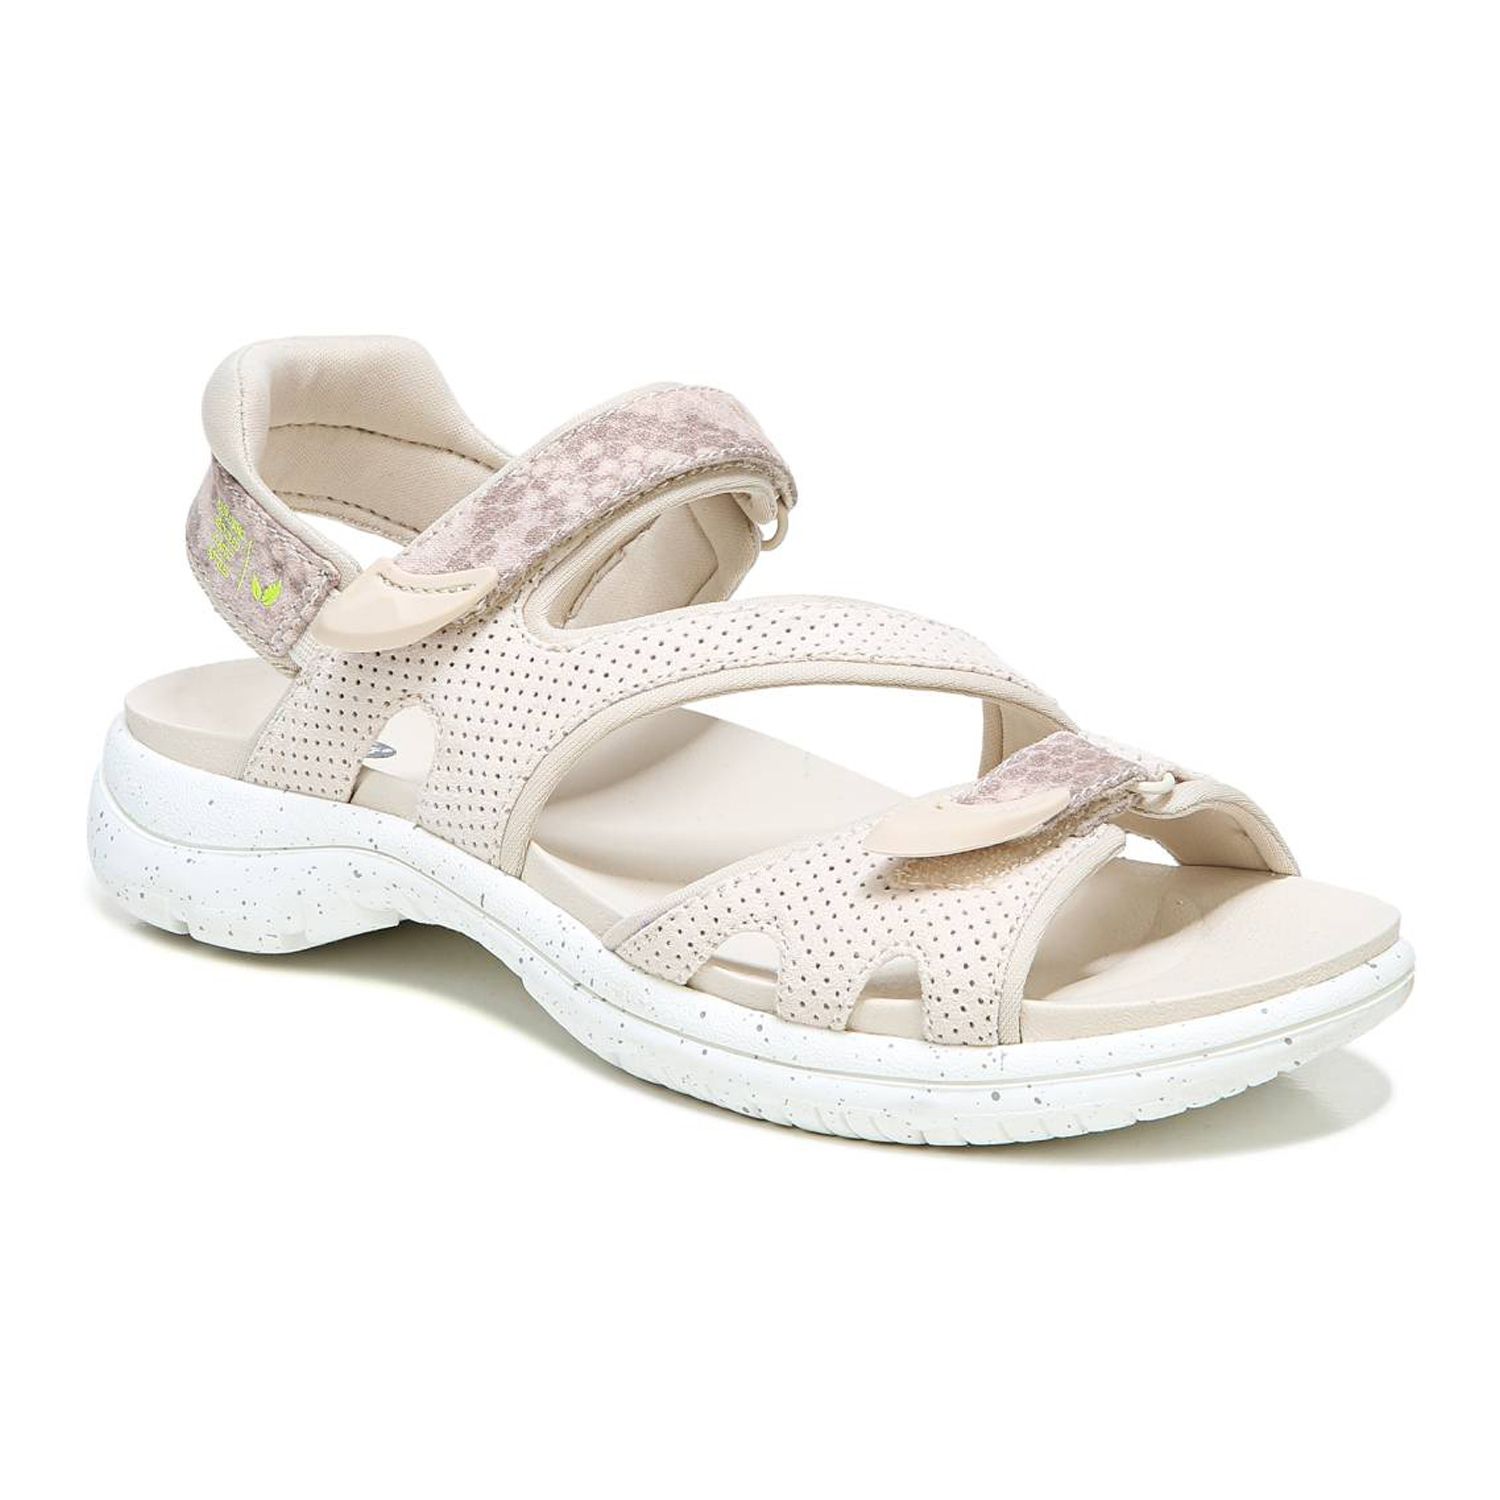 Image for Dr. Scholl's Adelle 2 Women's Ankle Strap Sandals at Kohl's.